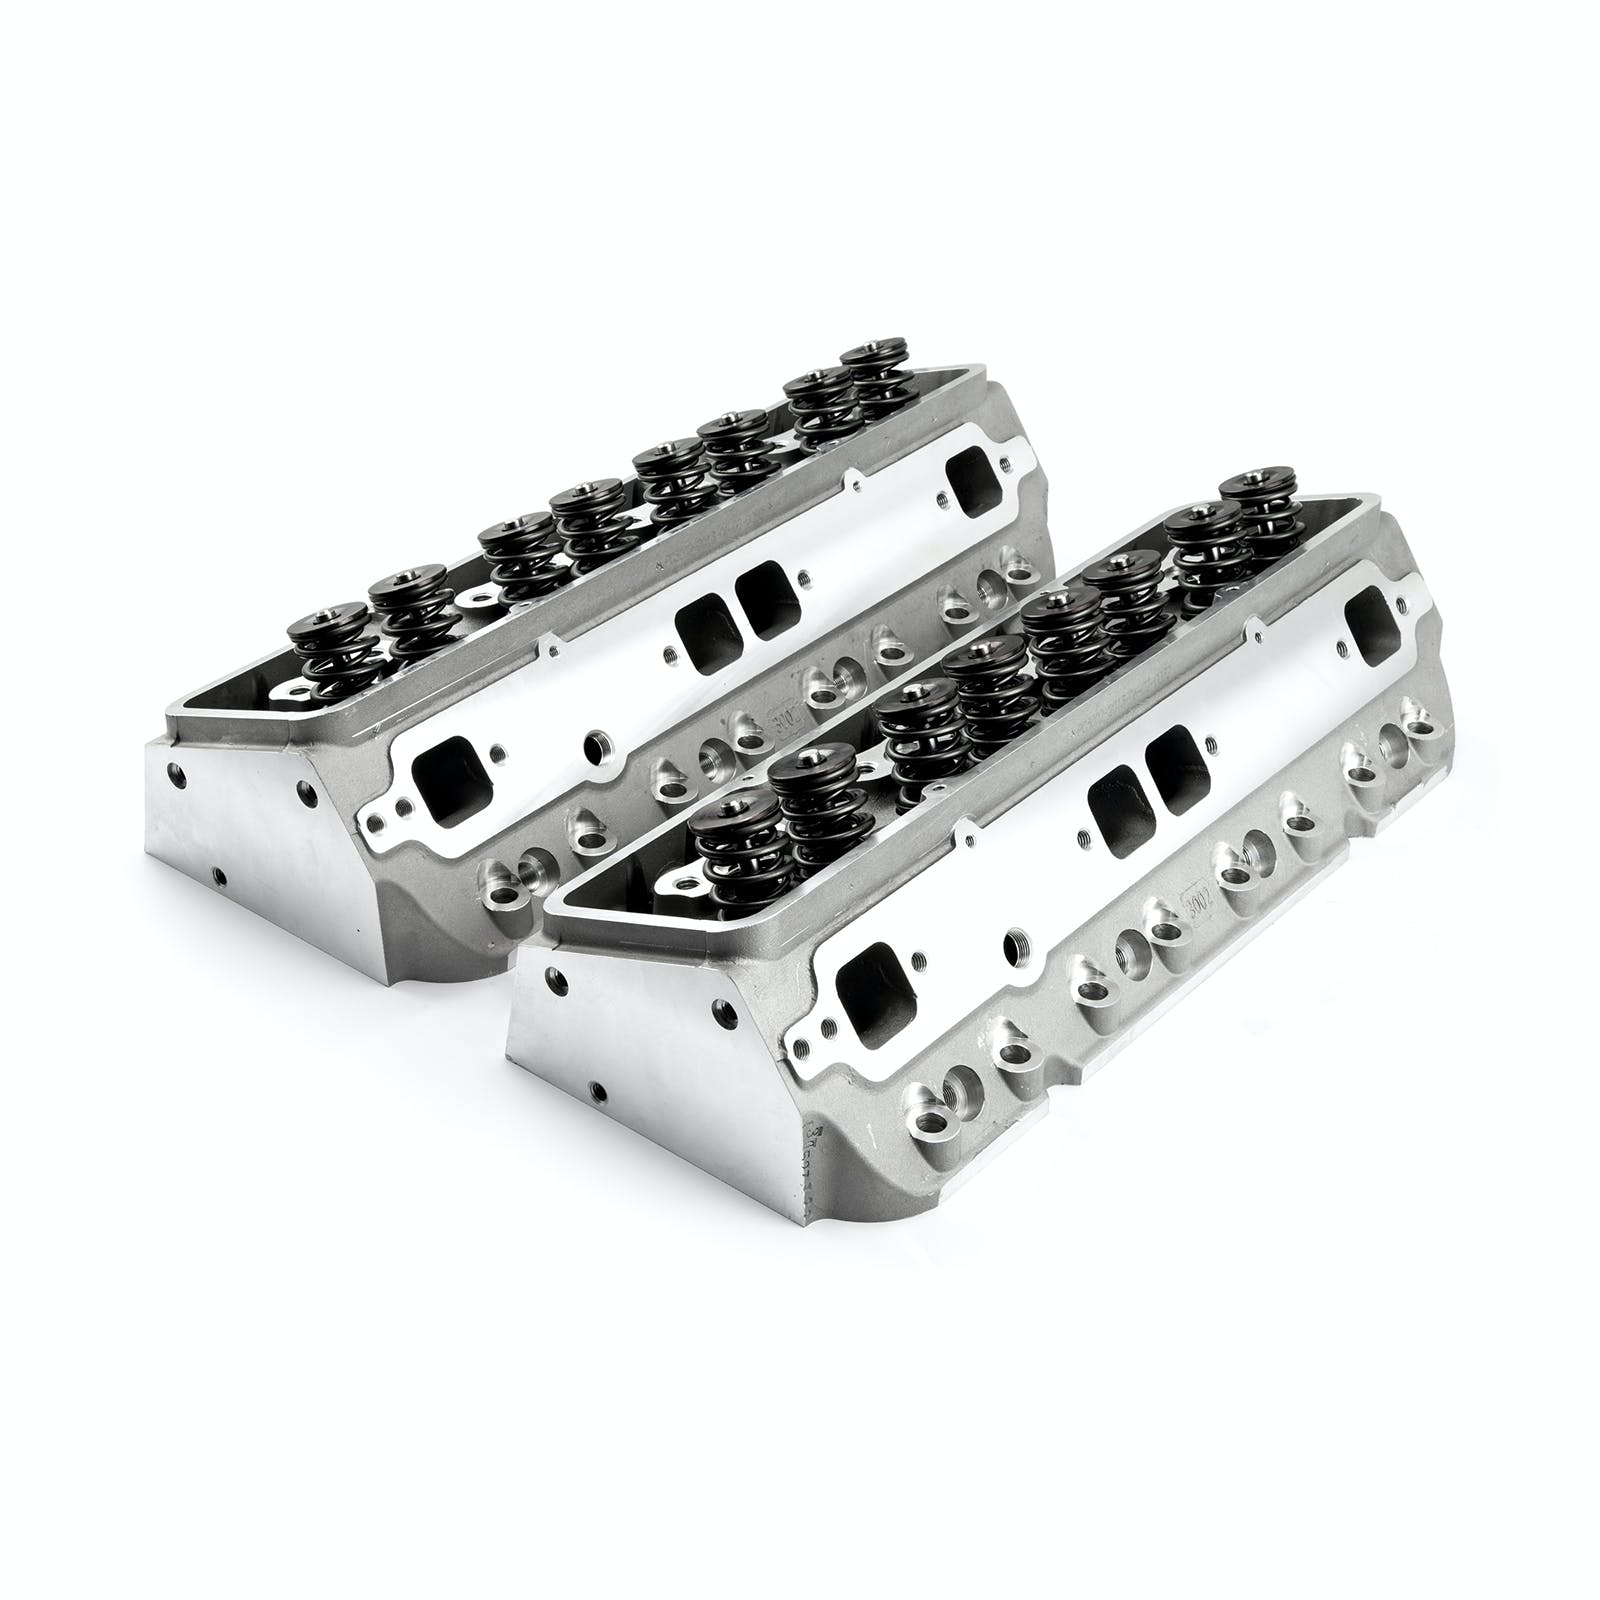 Speedmaster PCE281.2007 205cc 64cc Angle Hydr-FT Complete Aluminum Cylinder Heads